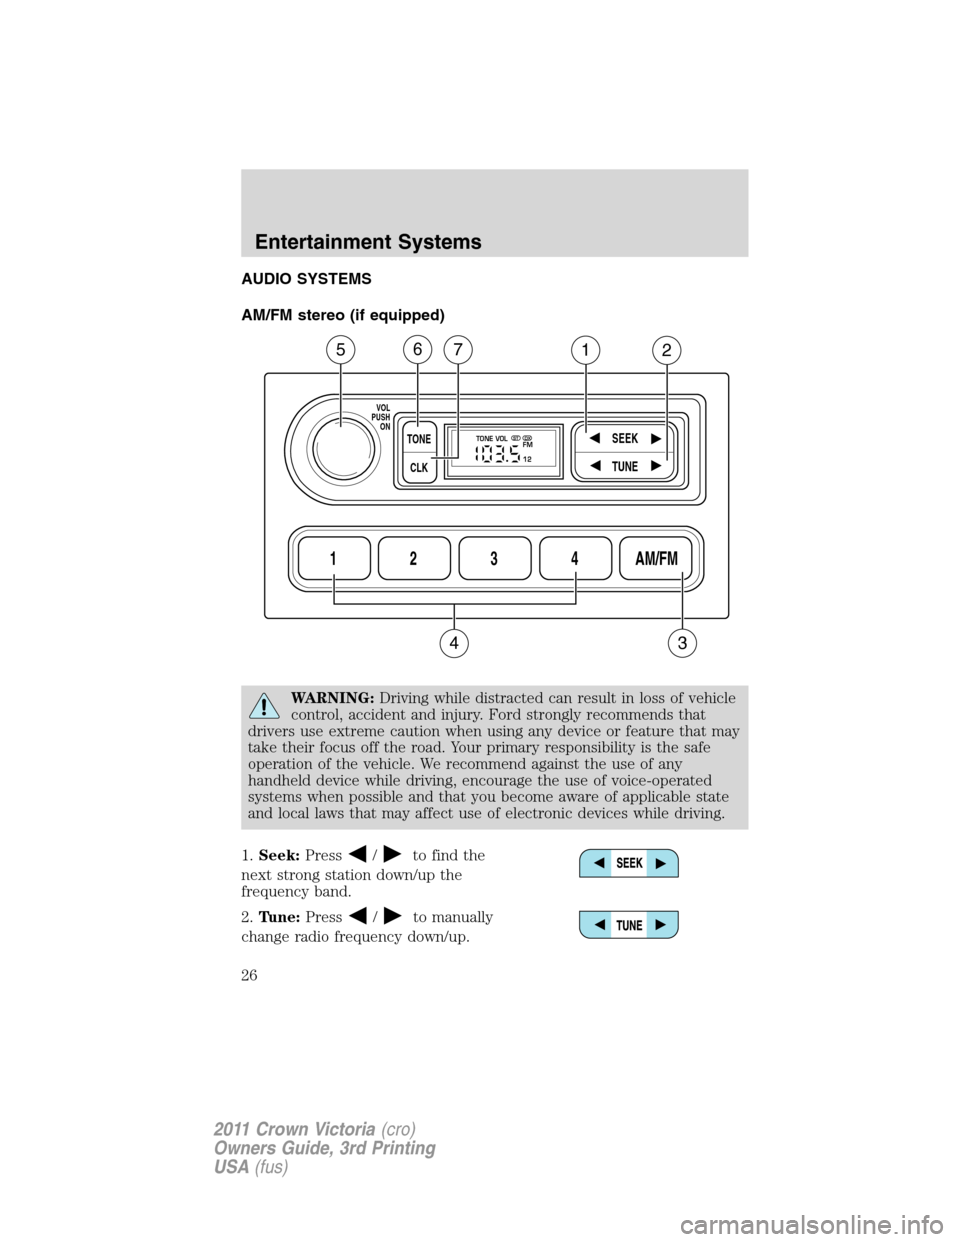 Mercury Grand Marquis 1011  s Owners Guide AUDIO SYSTEMS
AM/FM stereo (if equipped)
WARNING:Driving while distracted can result in loss of vehicle
control, accident and injury. Ford strongly recommends that
drivers use extreme caution when usi